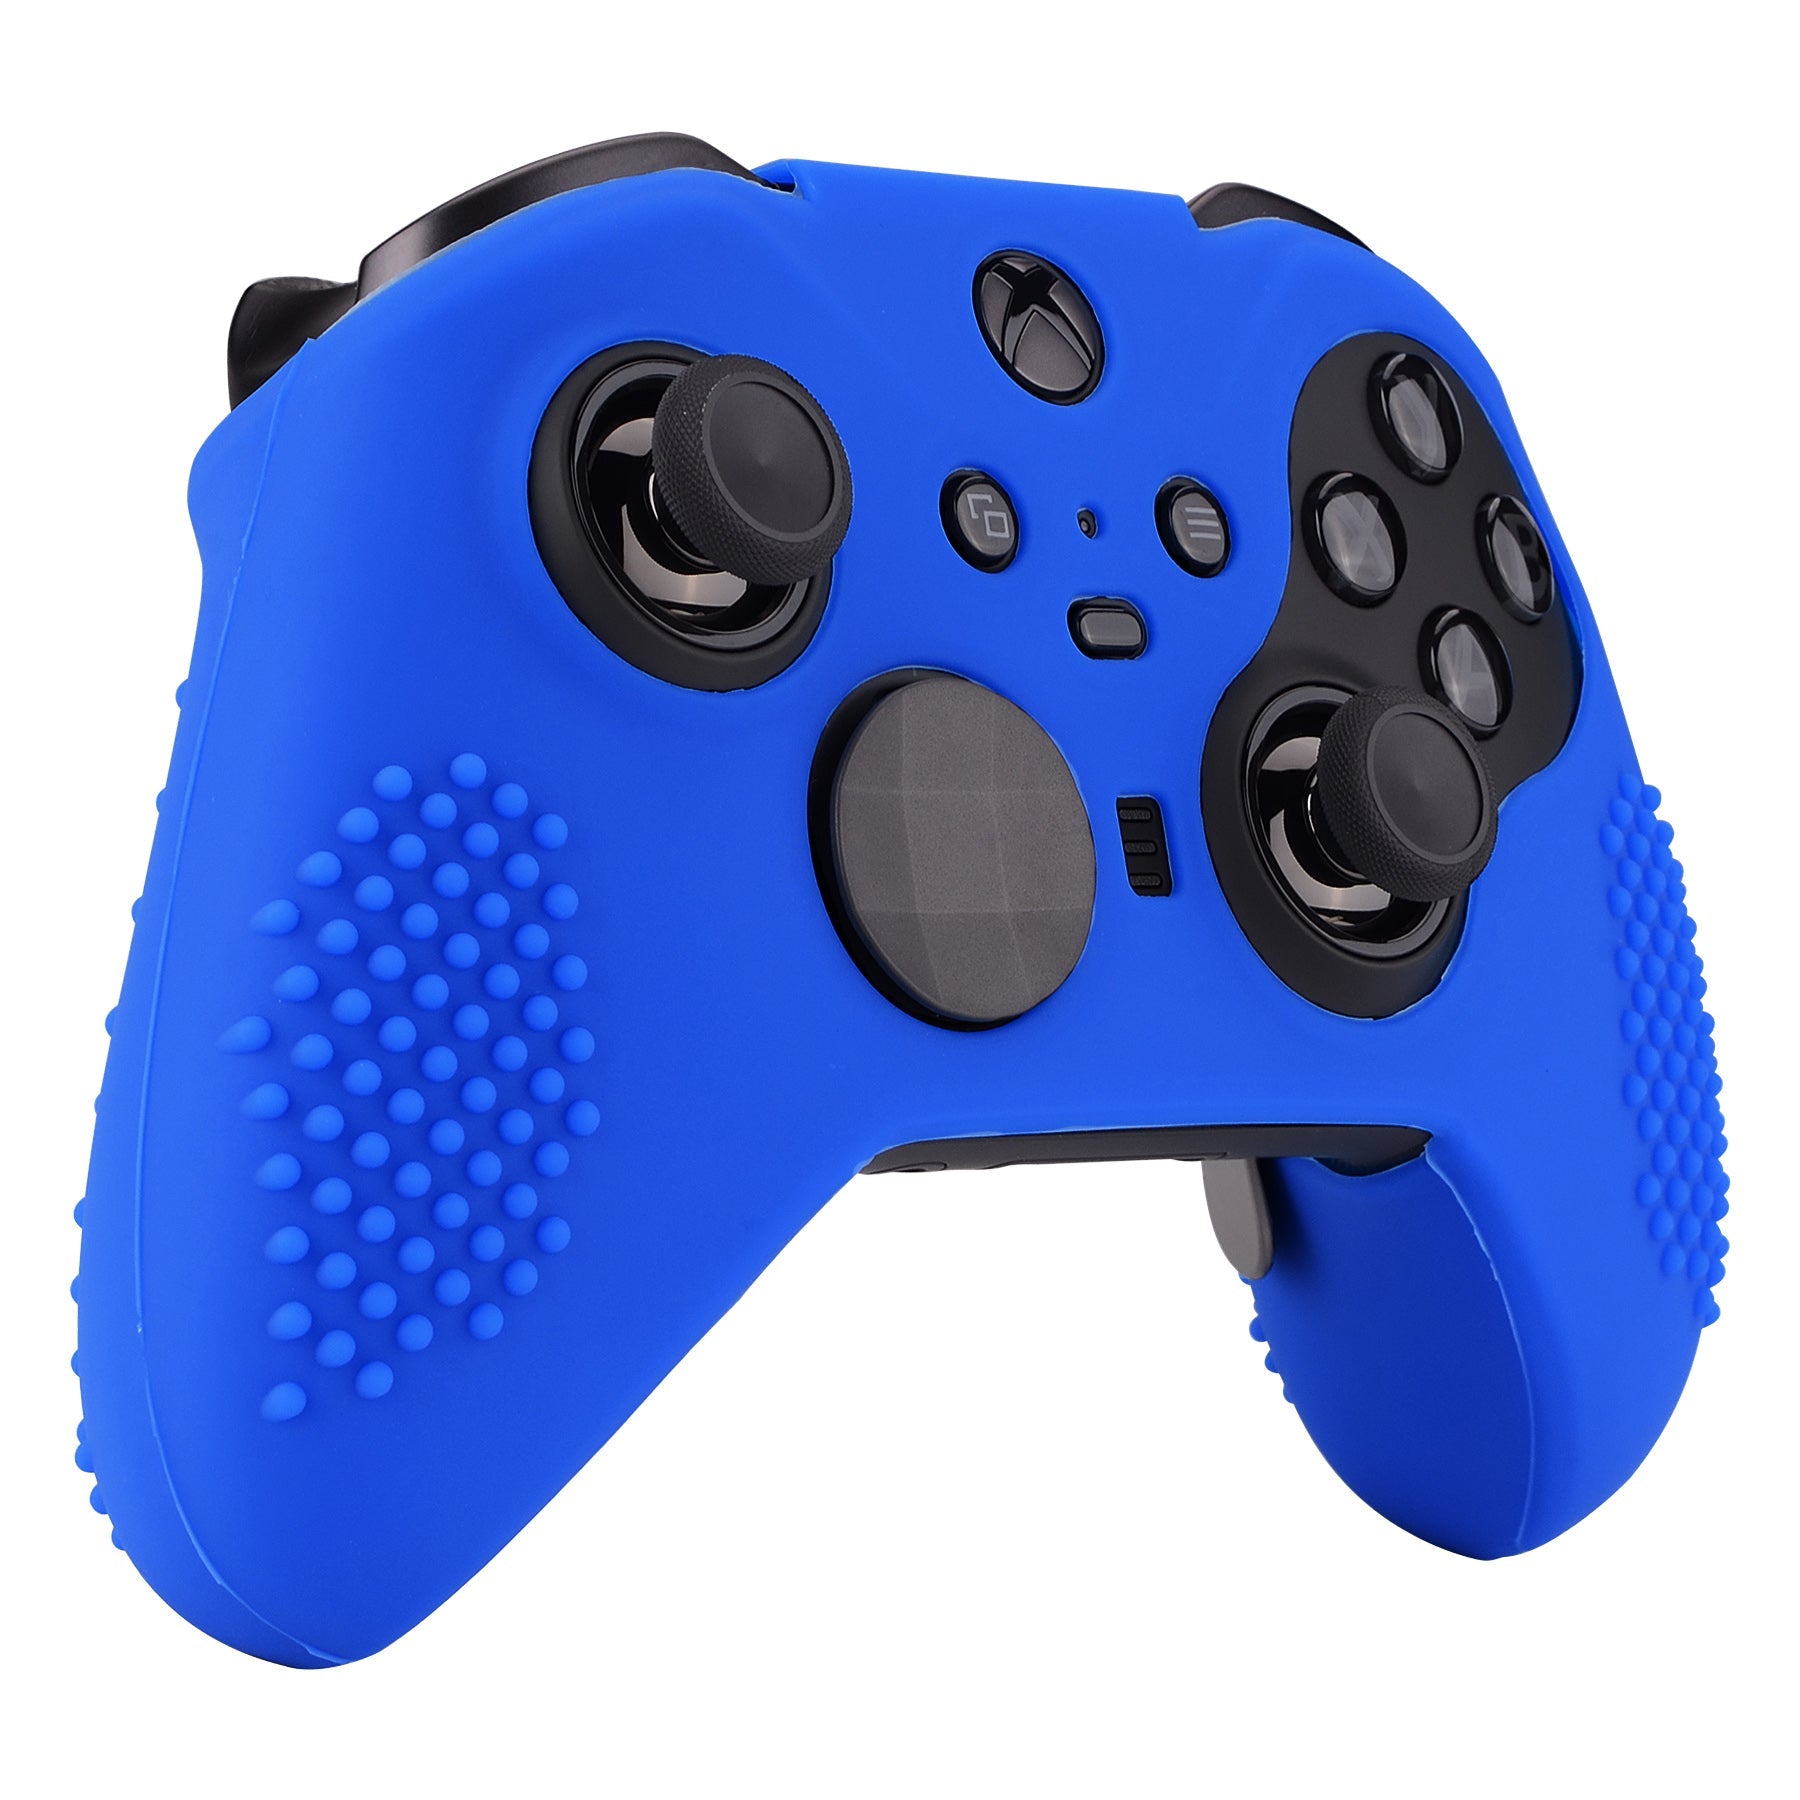 eXtremeRate Retail Blue Soft Anti-Slip Silicone Cover Skins, Controller Protective Case for New Xbox One Elite Series 2 with Thumb Grips Analog Caps -XBOWP0047GC